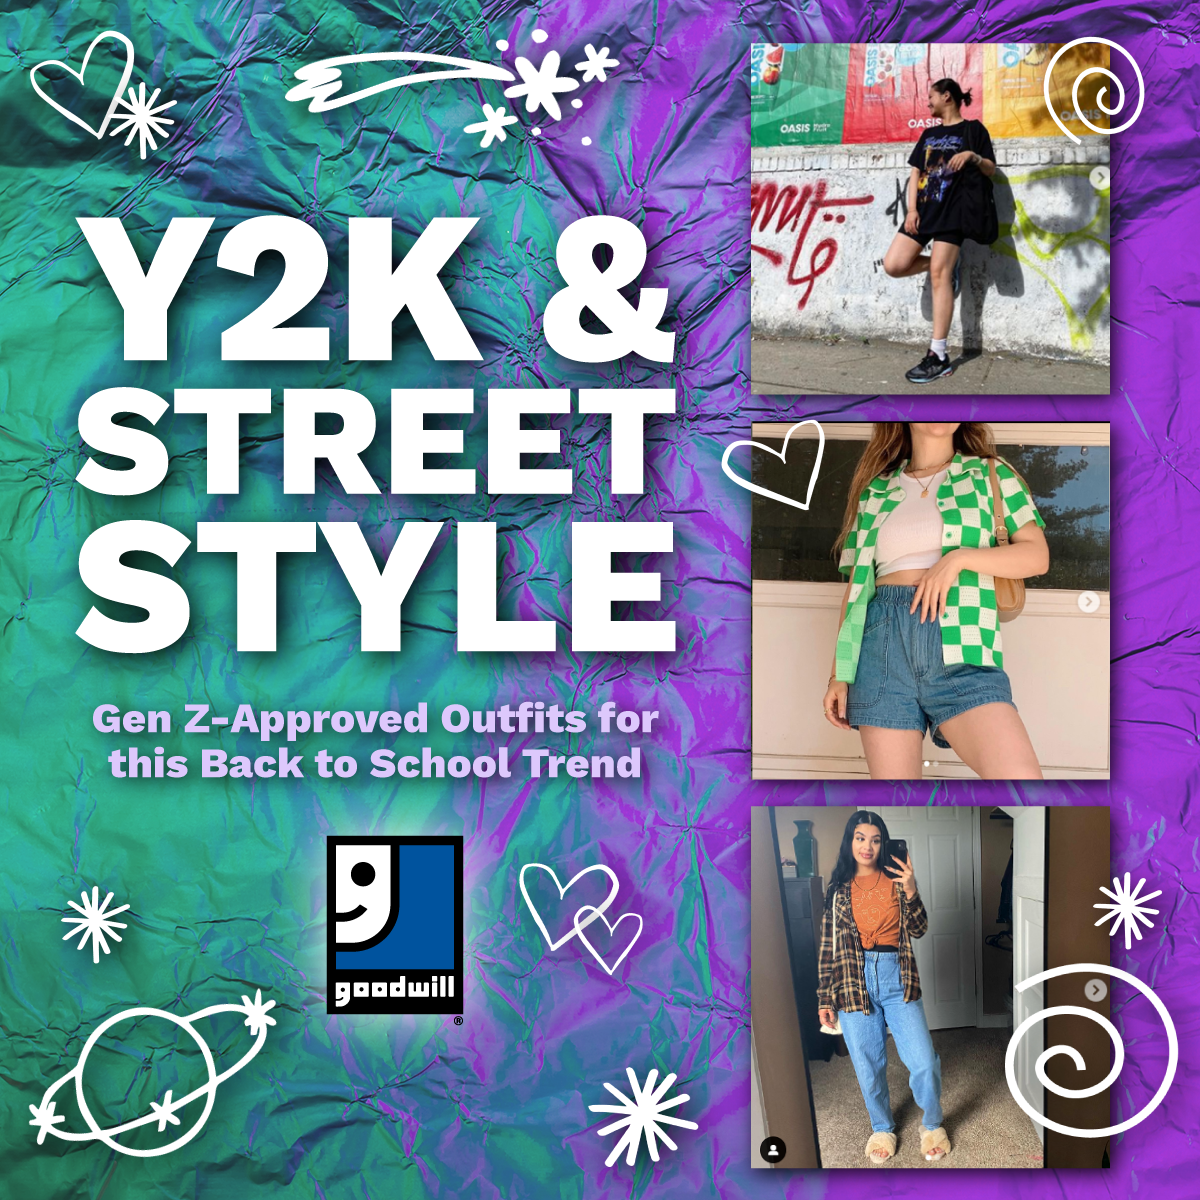 Why is Gen Z so Obsessed with Y2K Fashion? – Early 2000s Trends